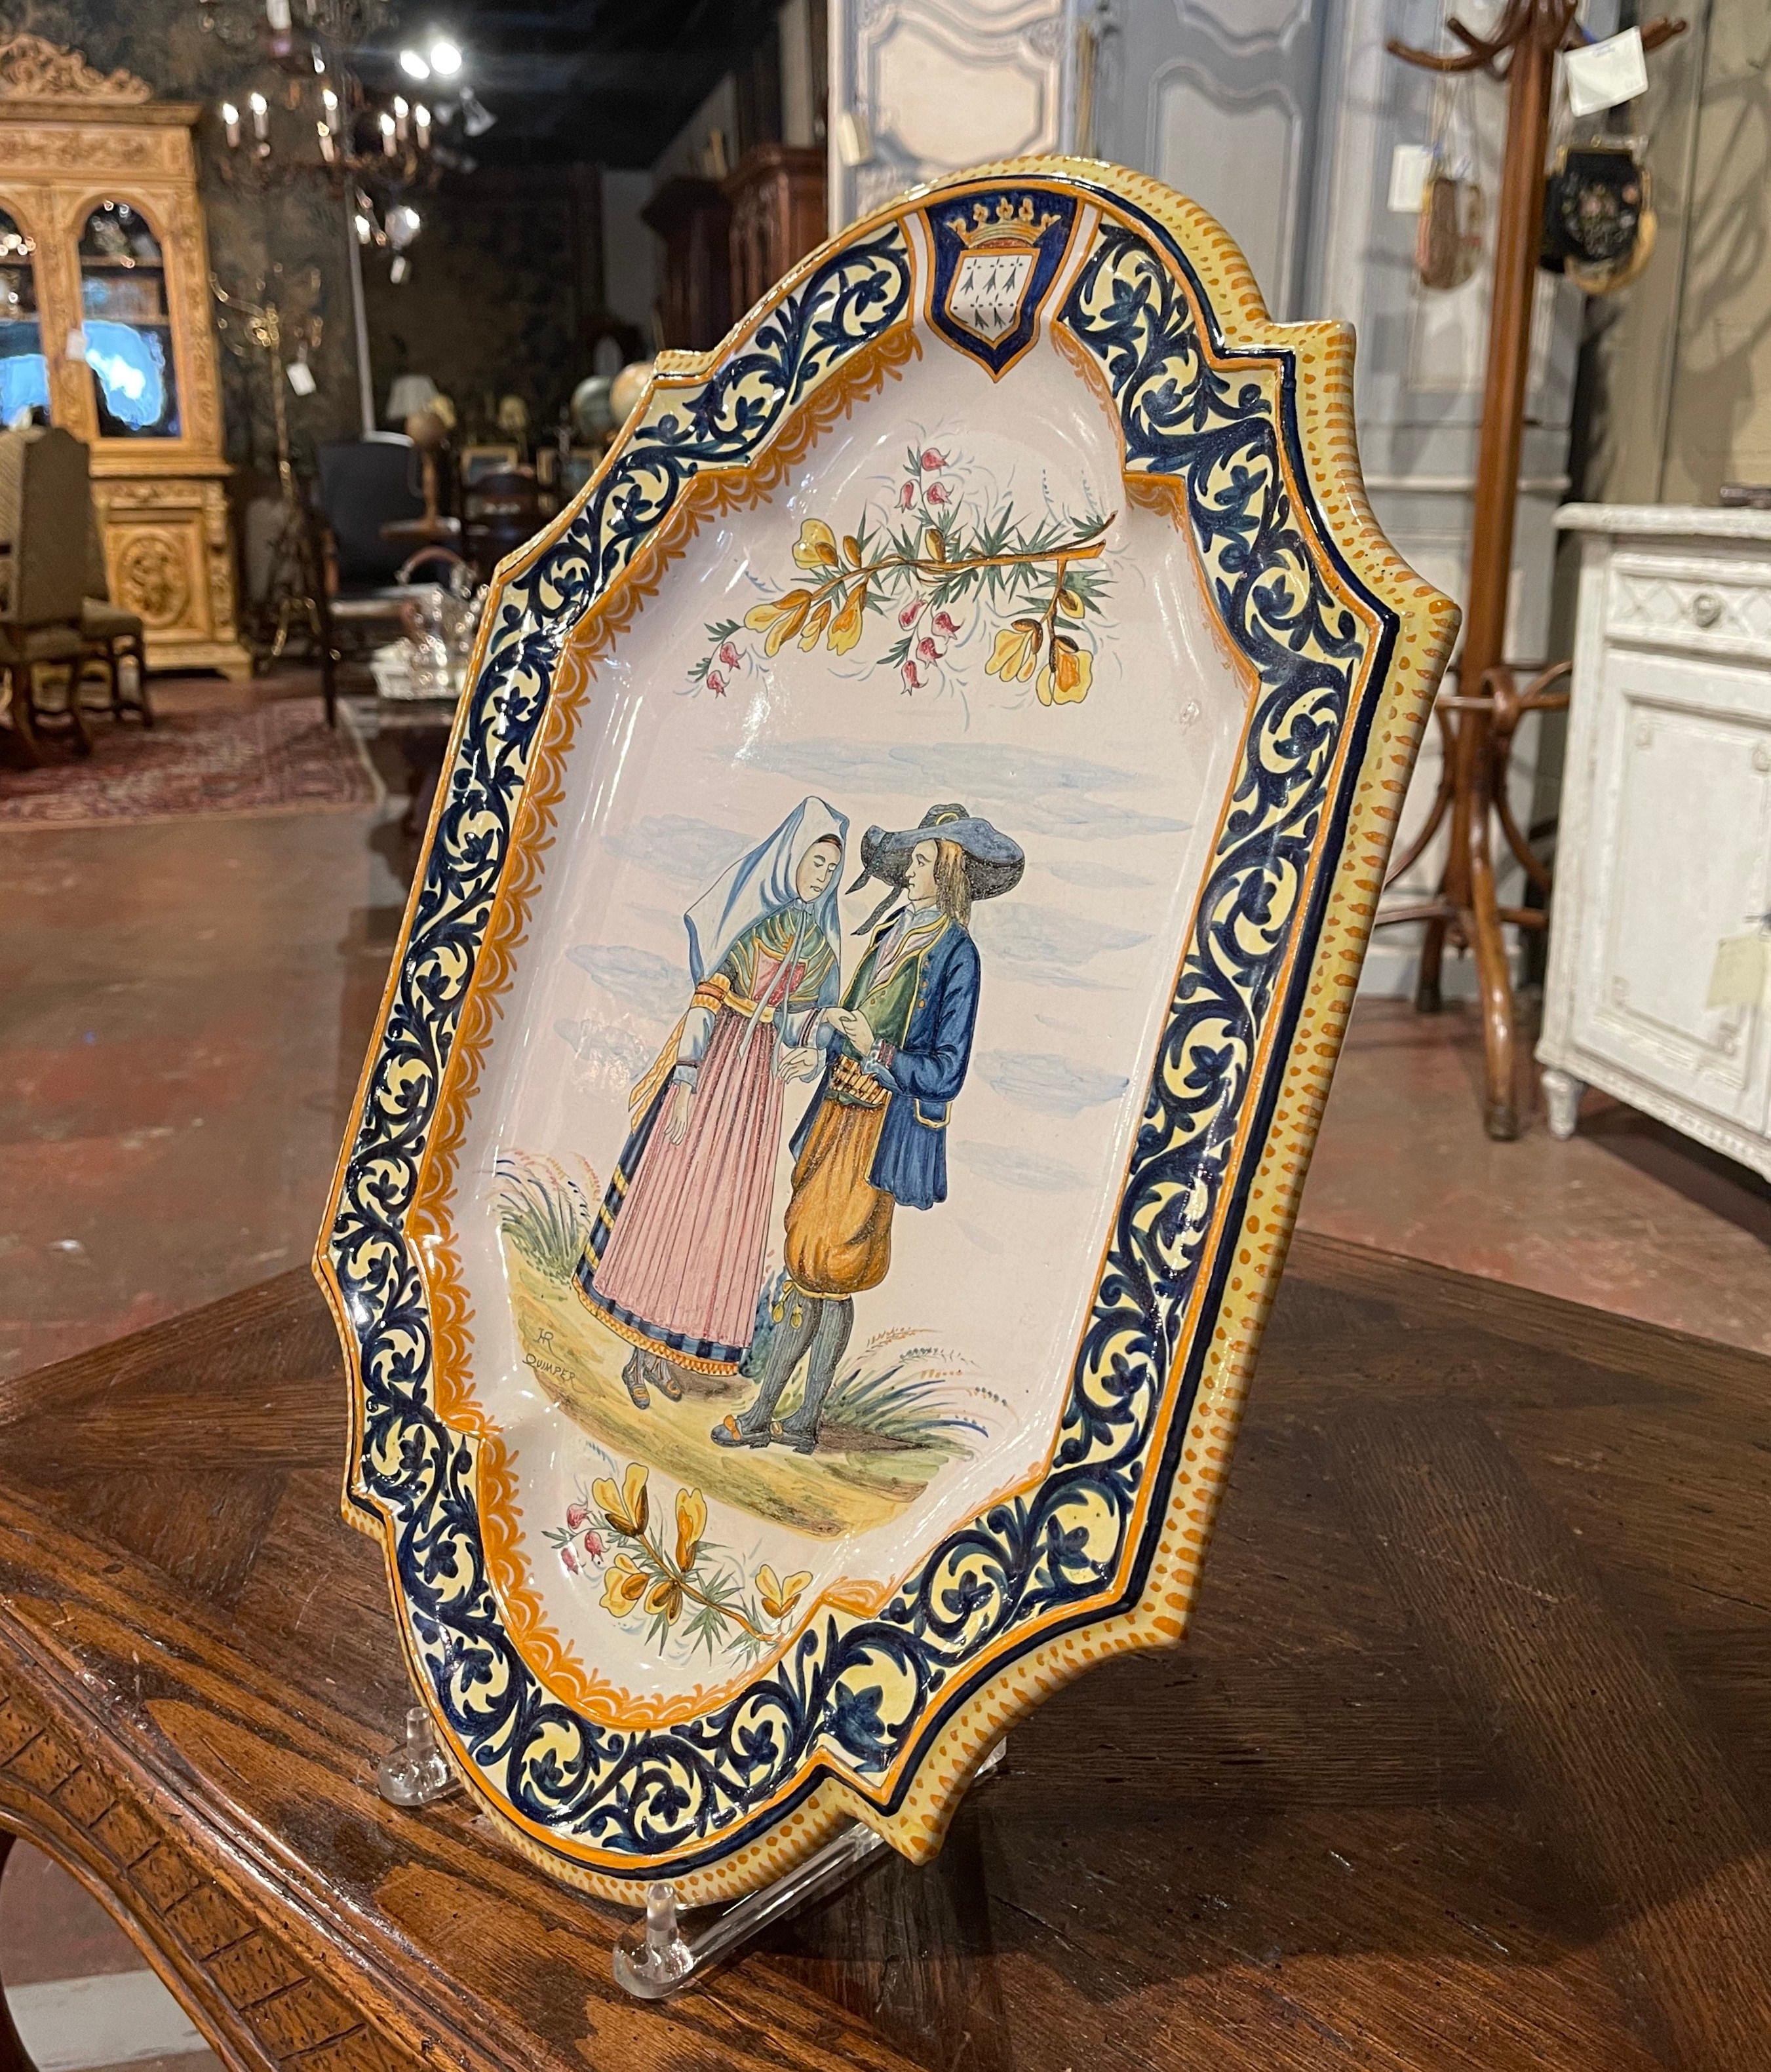 Decorate a wall or a shelf with this important antique platter. Created in Brittany, France circa 1895, the large hand painted ceramic plate depicts a Breton couple dancing in traditional costumes. The oval, porcelain platter is decorated with a